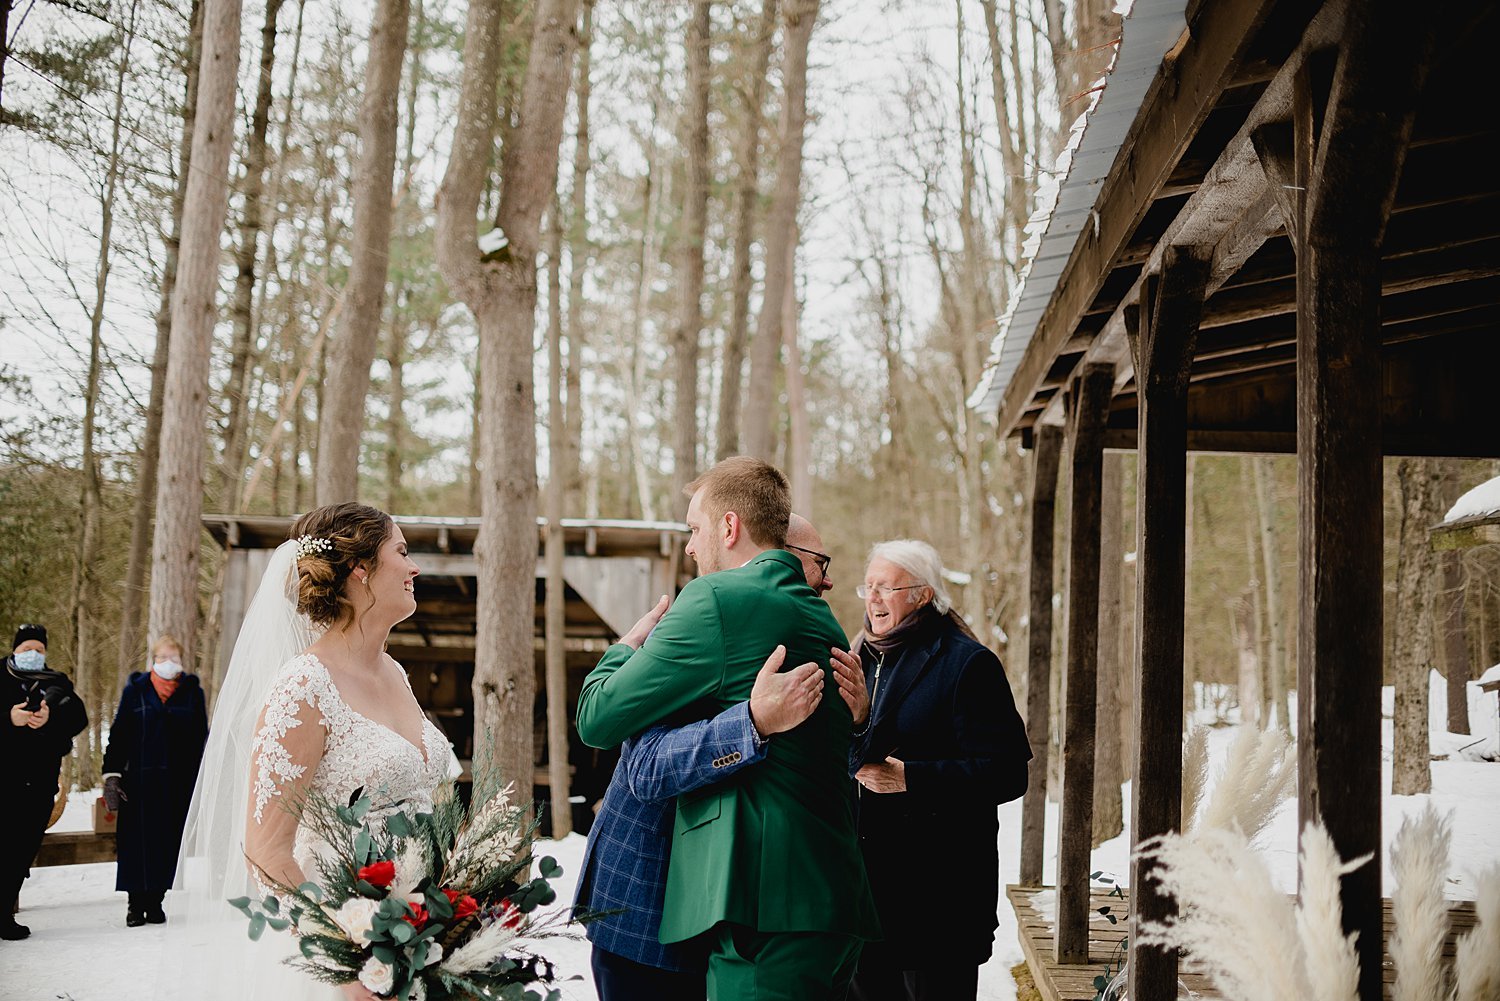 Intimate Winter Elopement at O'Hara Mill Homestead in Madoc, Ontario | Prince Edward County Wedding Photographer | Holly McMurter Photographs_0012.jpg